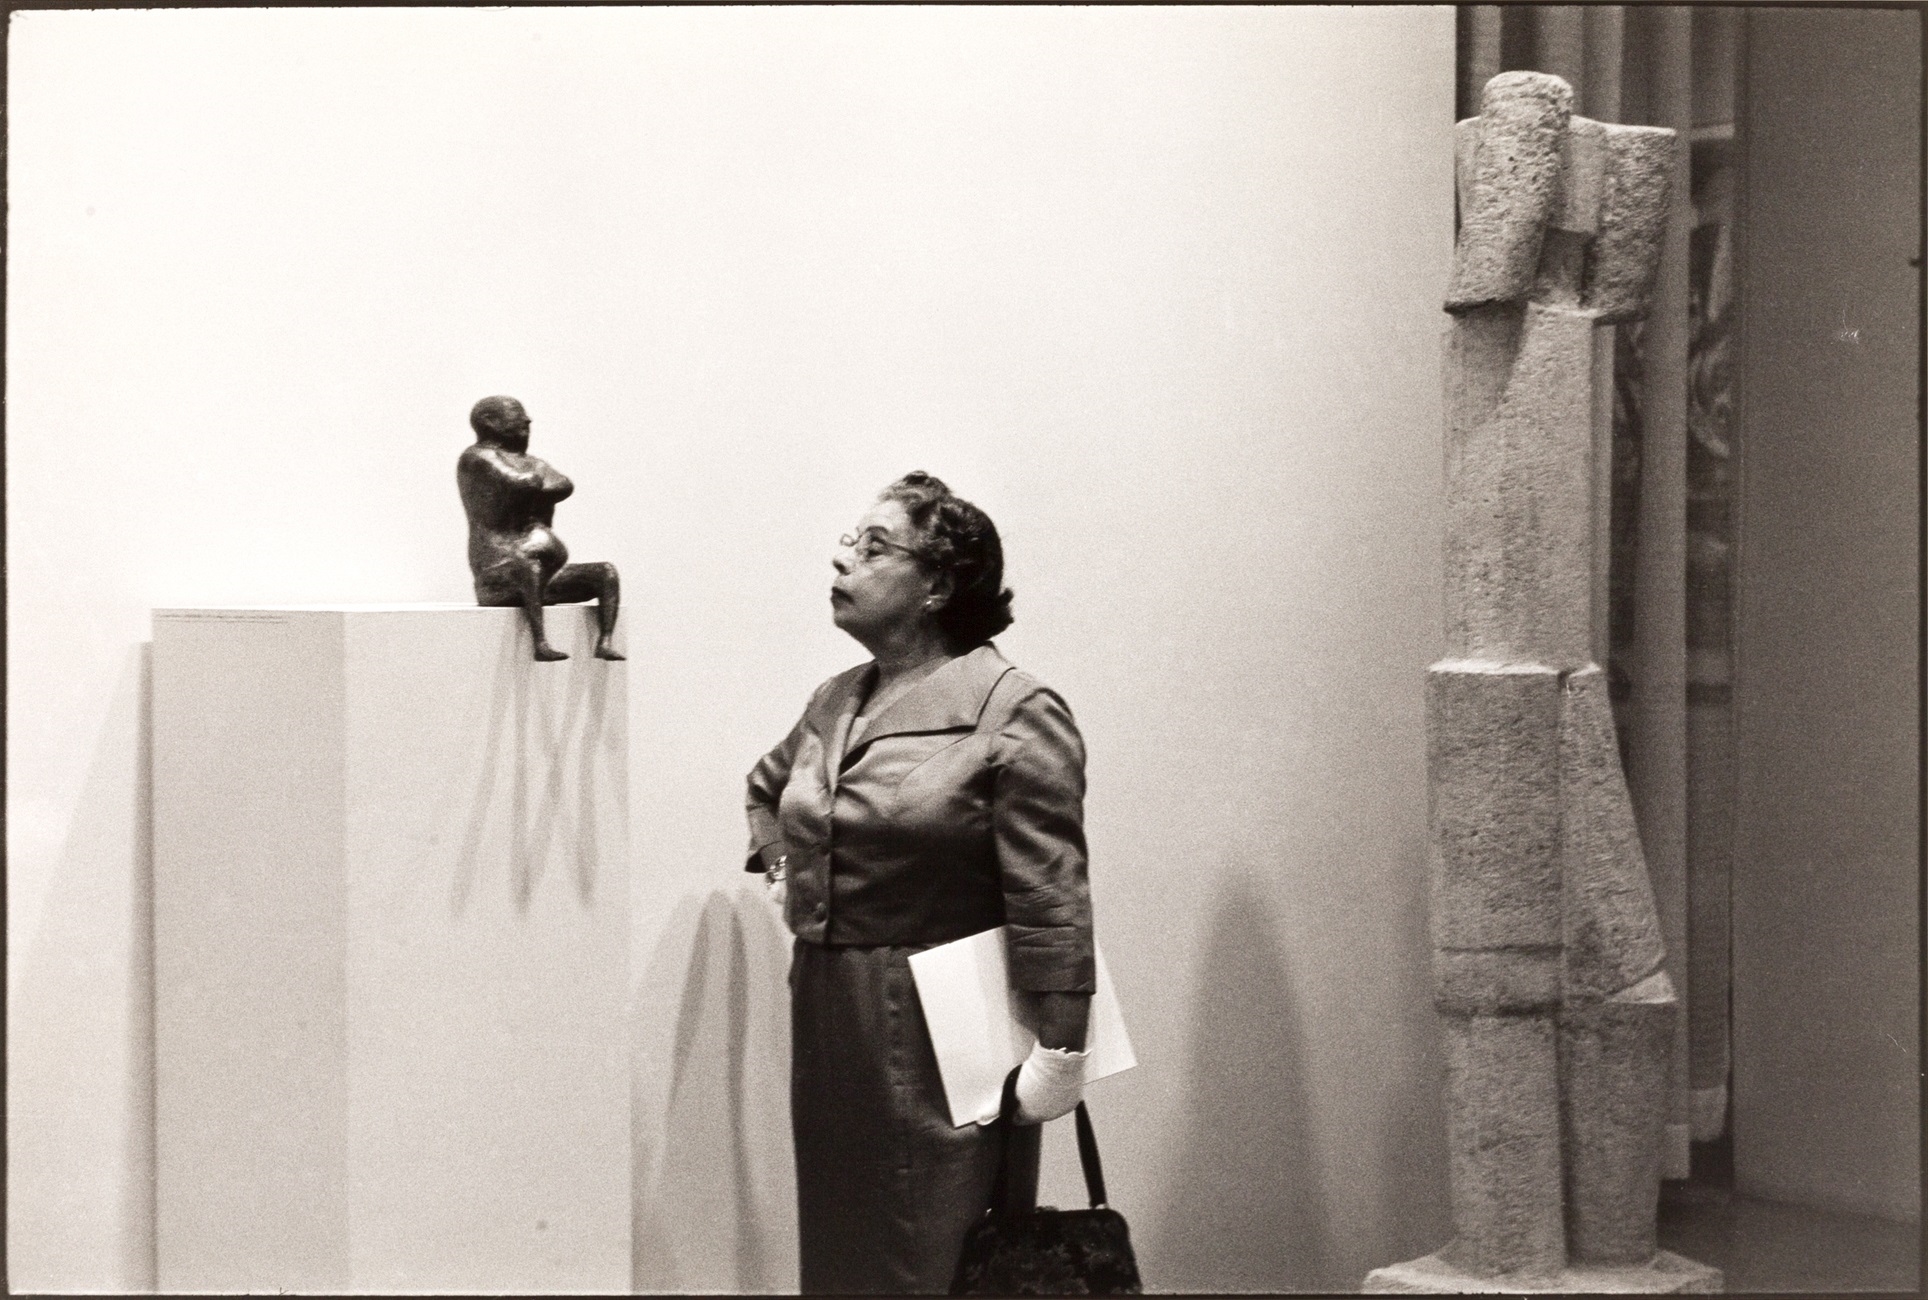 Artwork by Eve Arnold, EVE ARNOLD (1912–2012)
Museum of Modern Art, New York City 1959, Made of Gelatin silver print, printed in